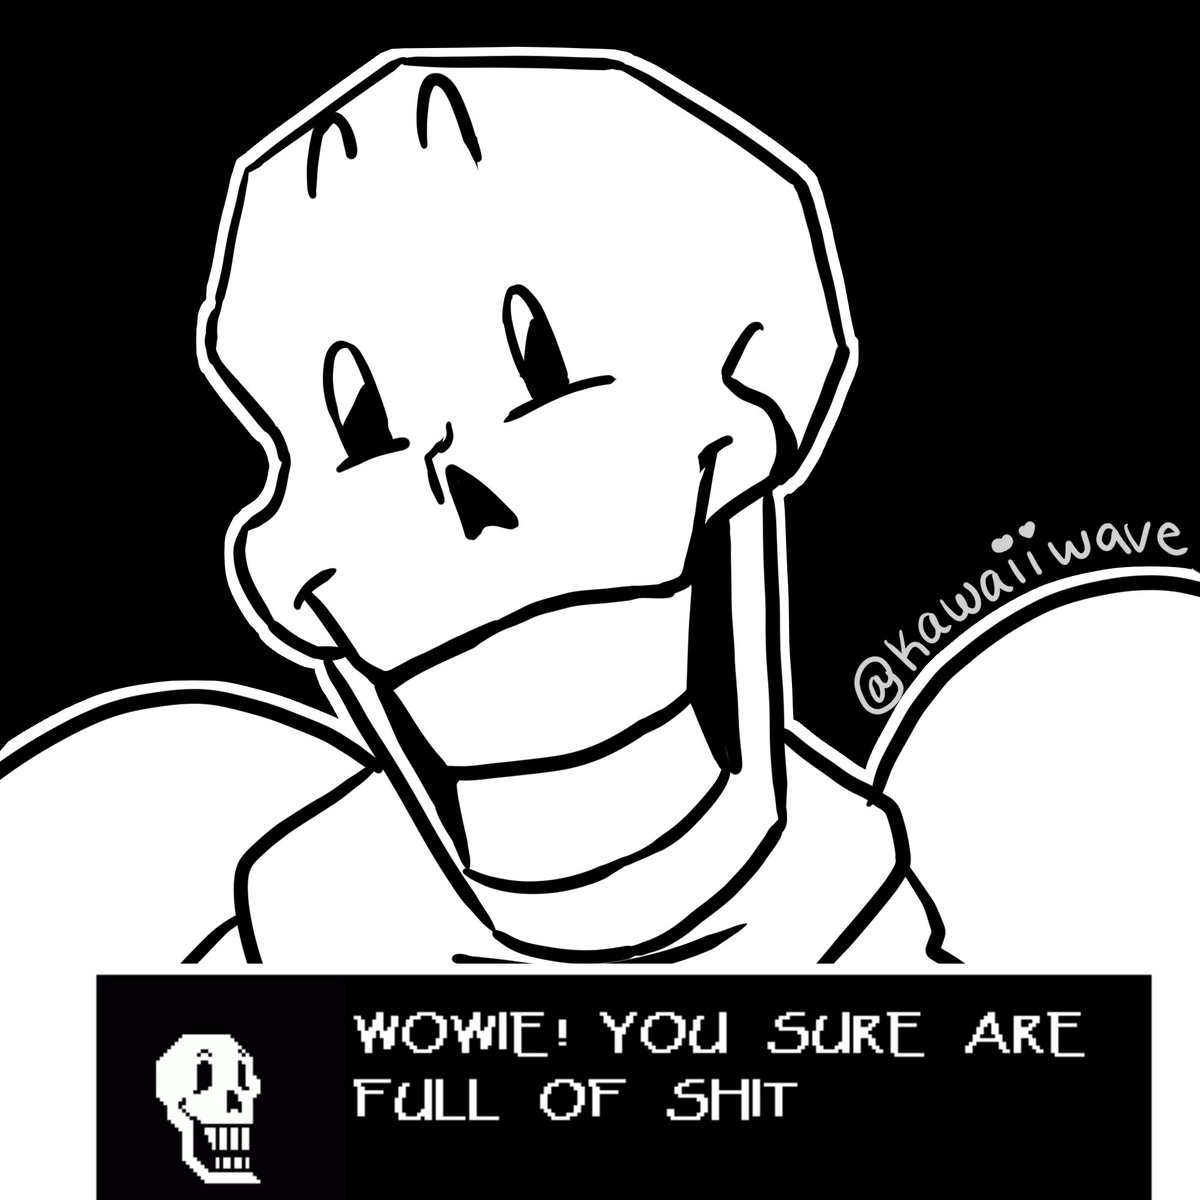 I'll let yall guess who he's talking to 👀

#letpapyrussayfuck #papyrus #undertale #letpapyrussayfuckday #cursing